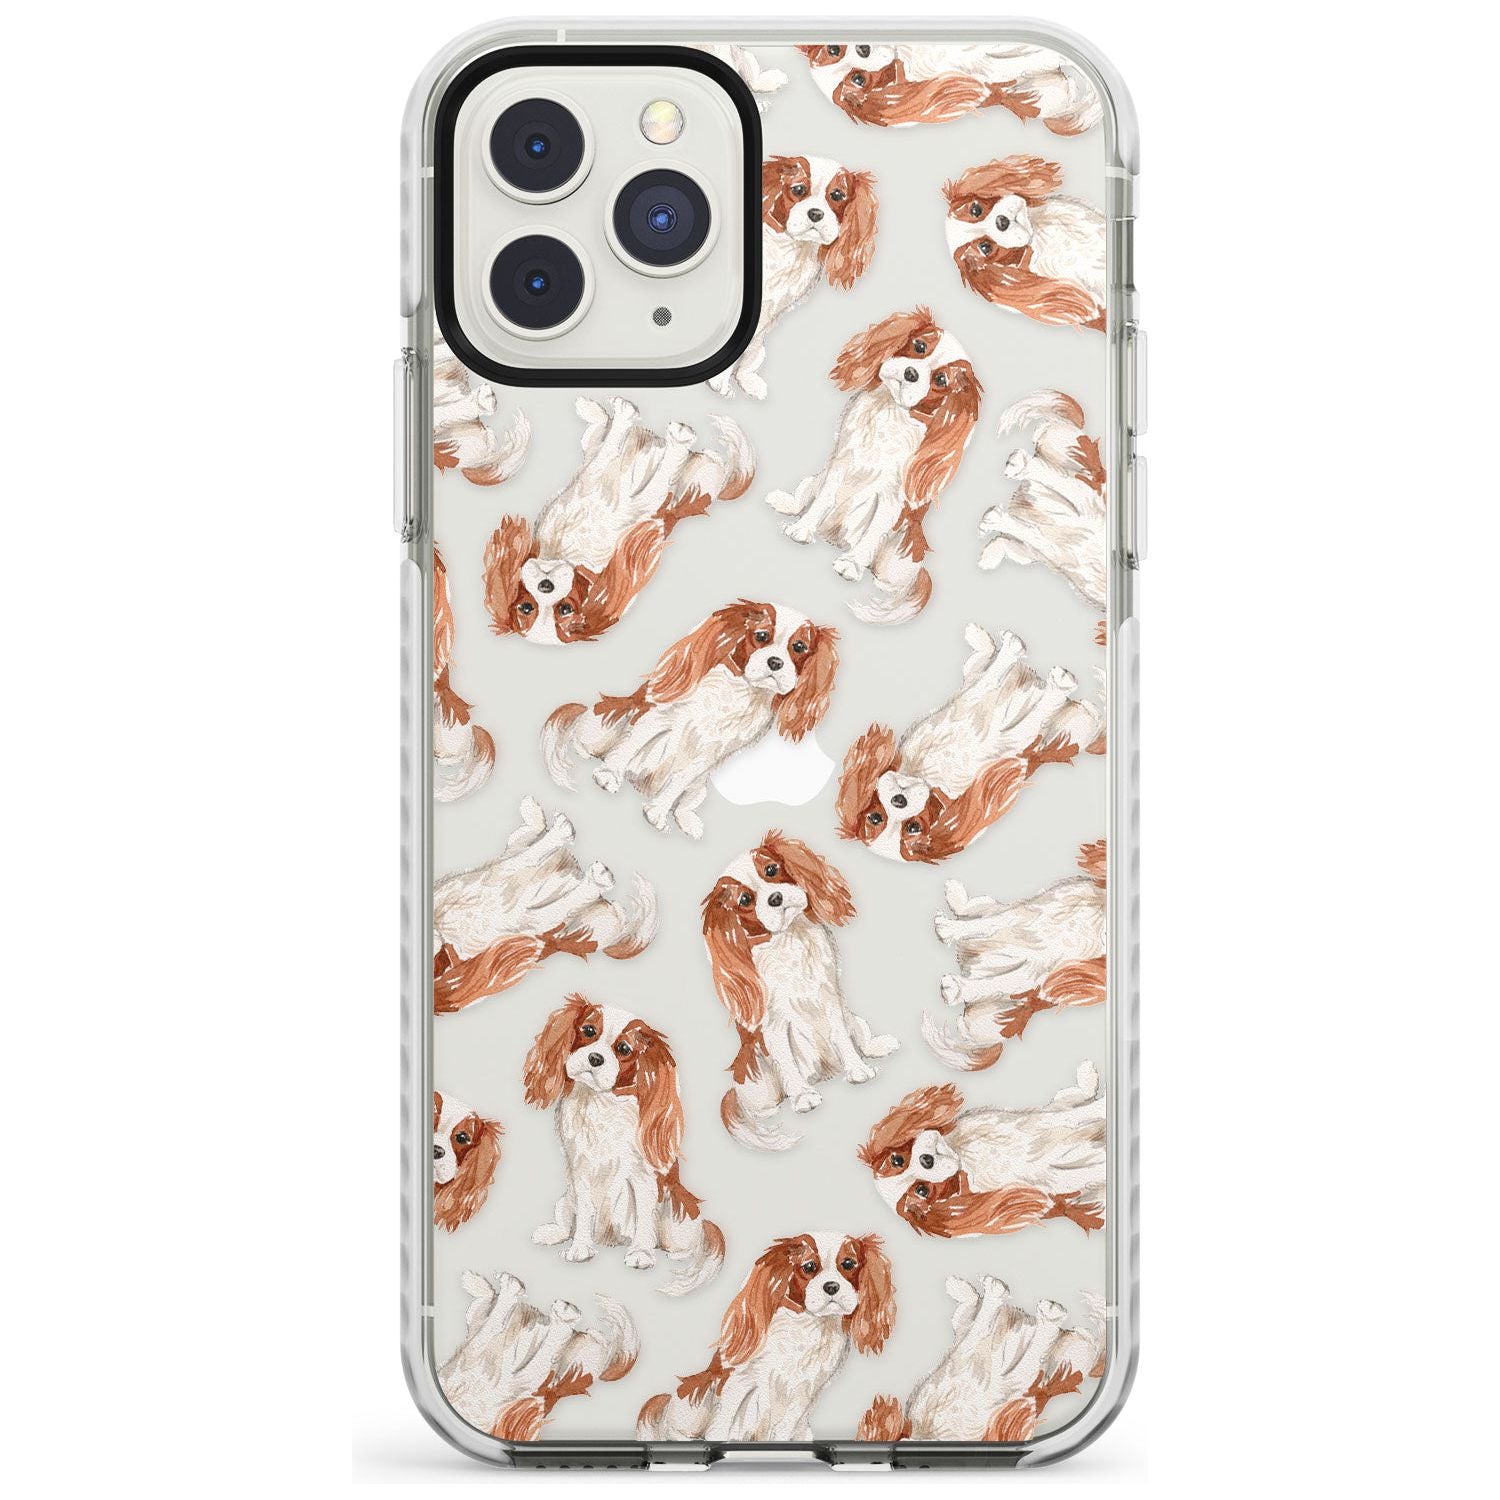 Cavalier King Charles Spaniel Dog Pattern Impact Phone Case for iPhone 11 Pro Max